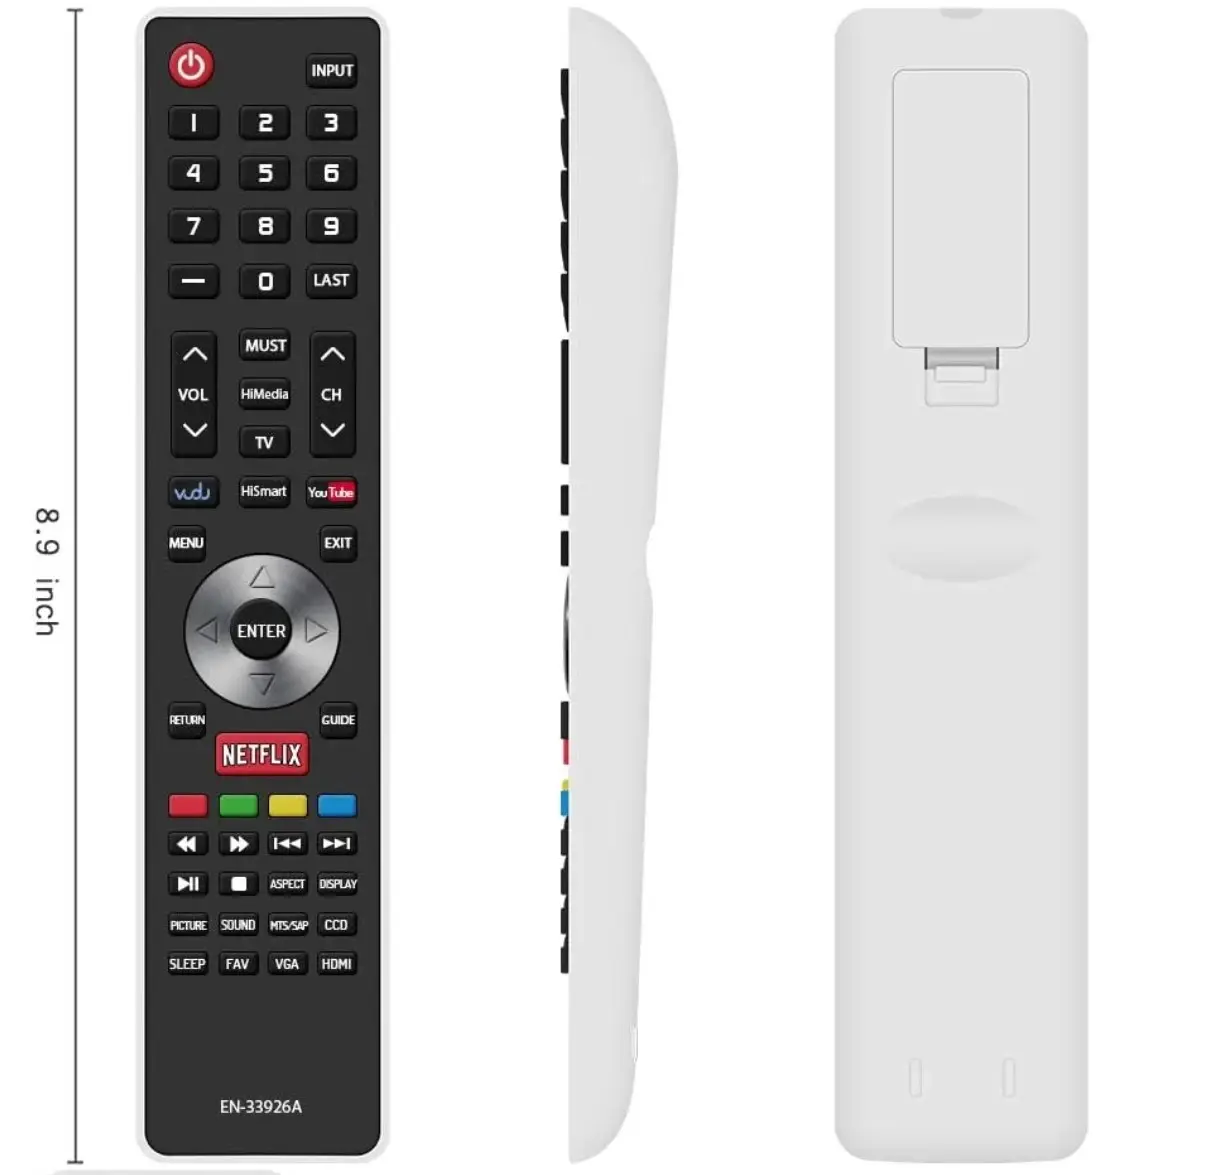 RCU Replacement Remote Control EN-33926A for Hisense-Smart-TV-Remote, with Netflix, VUDU, YouTube Buttons